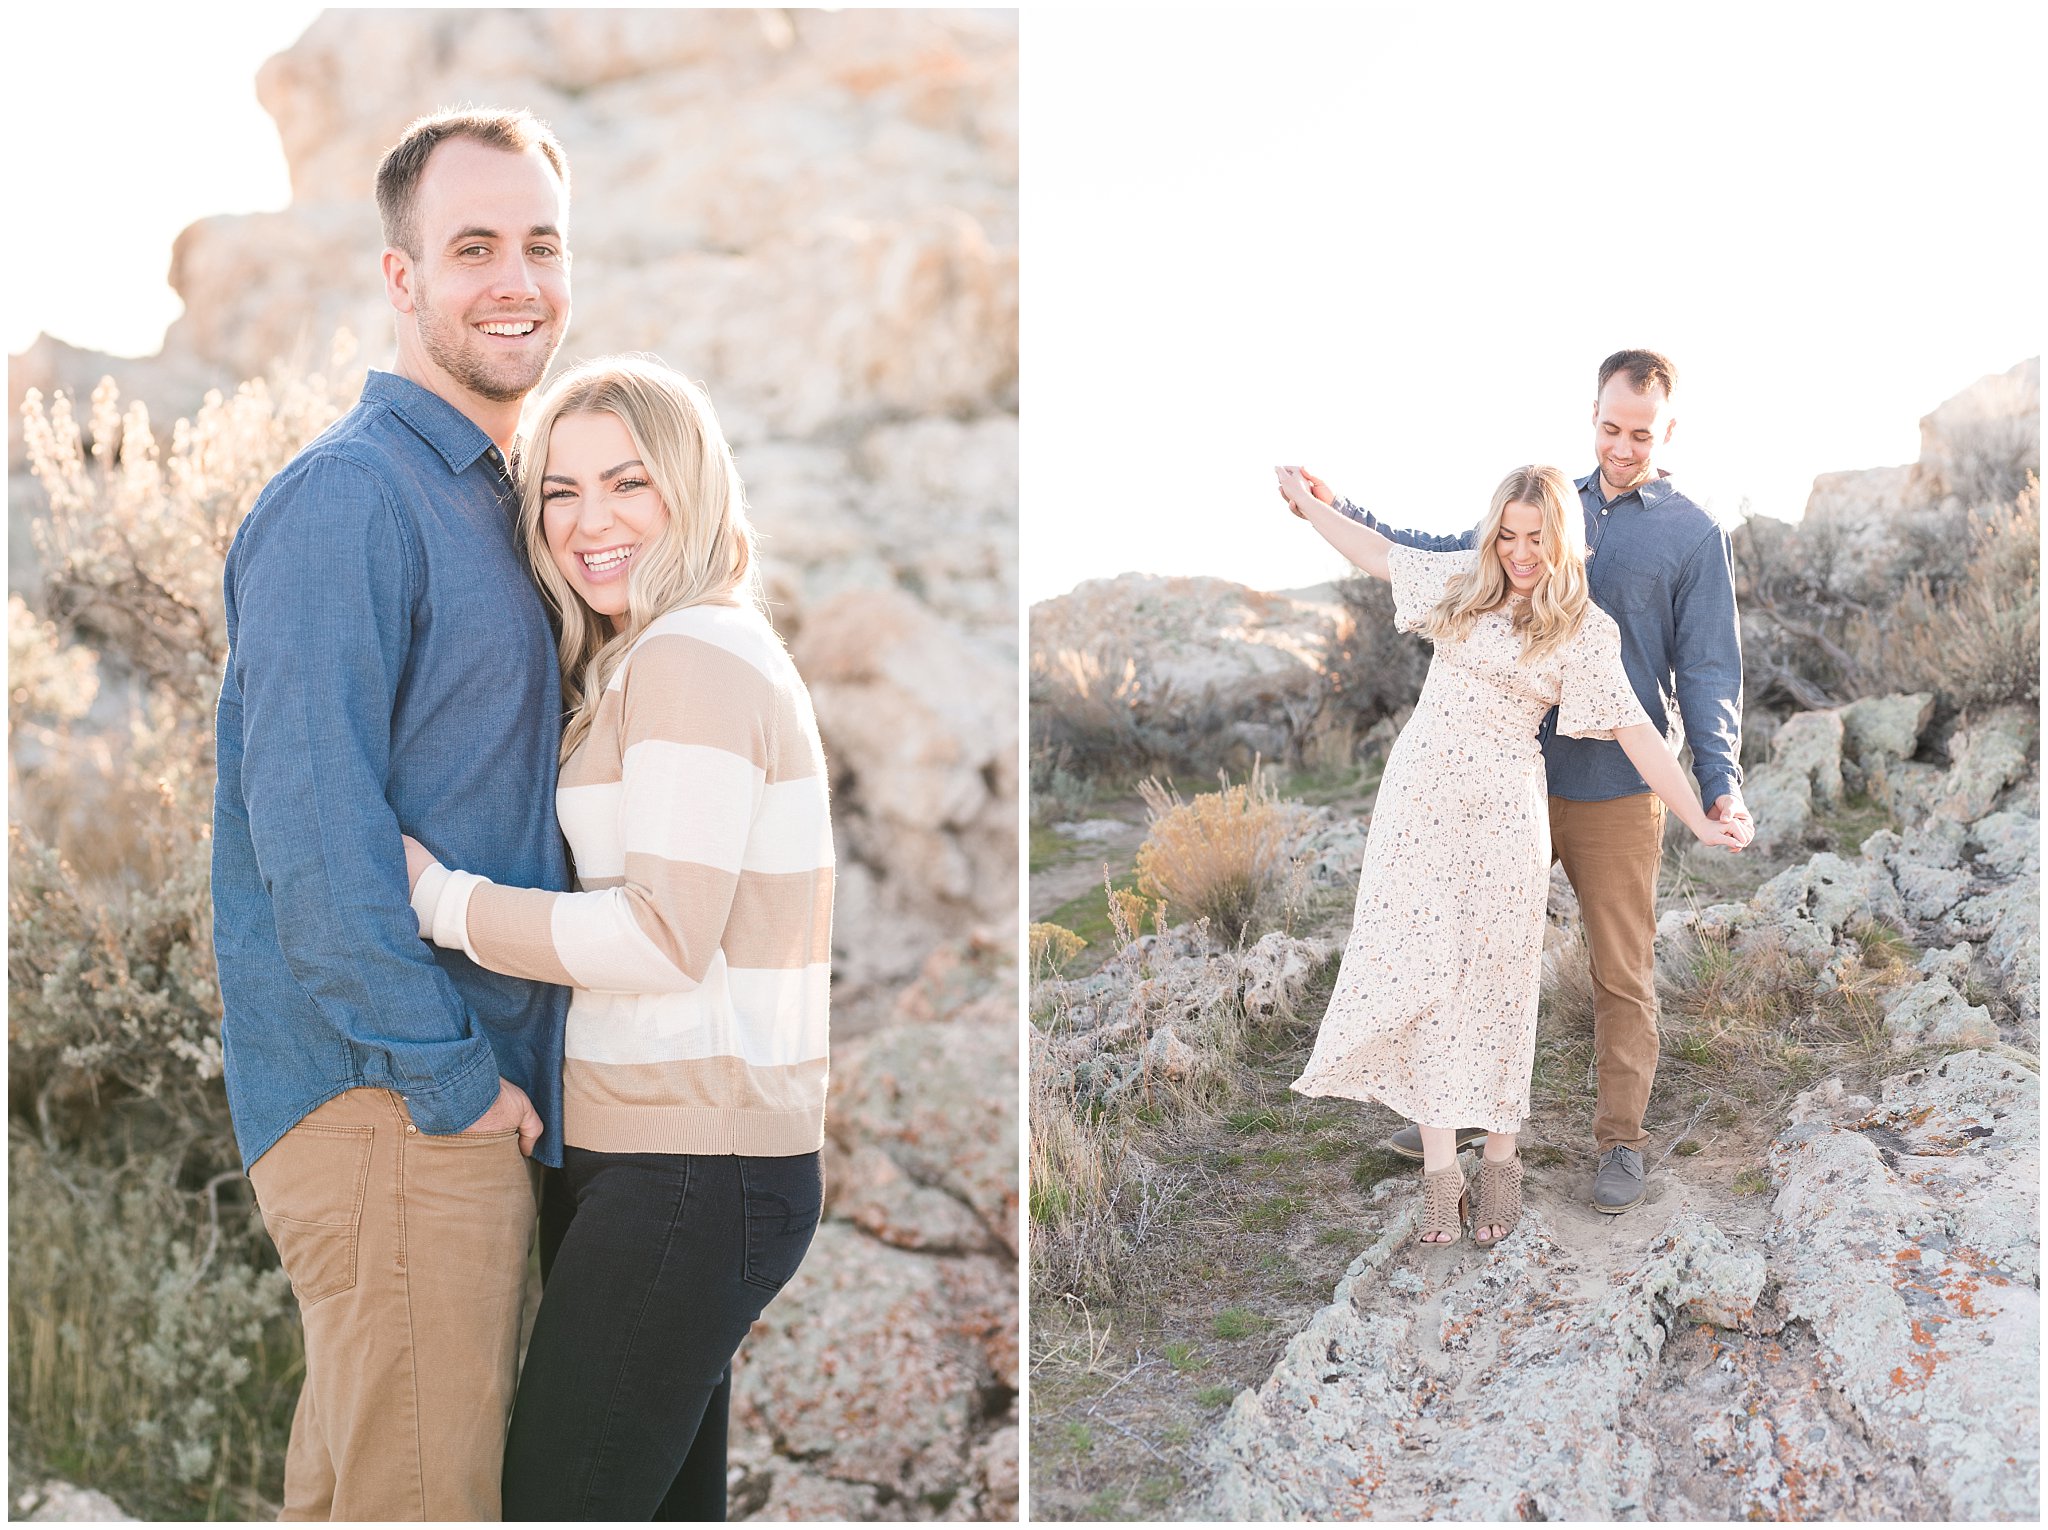 Couple in white dress with shape pattern and navy blue shirt with camel pants in a rocky desert landscape for engagements | Antelope Island Spring Engagement | Jessie and Dallin Photography